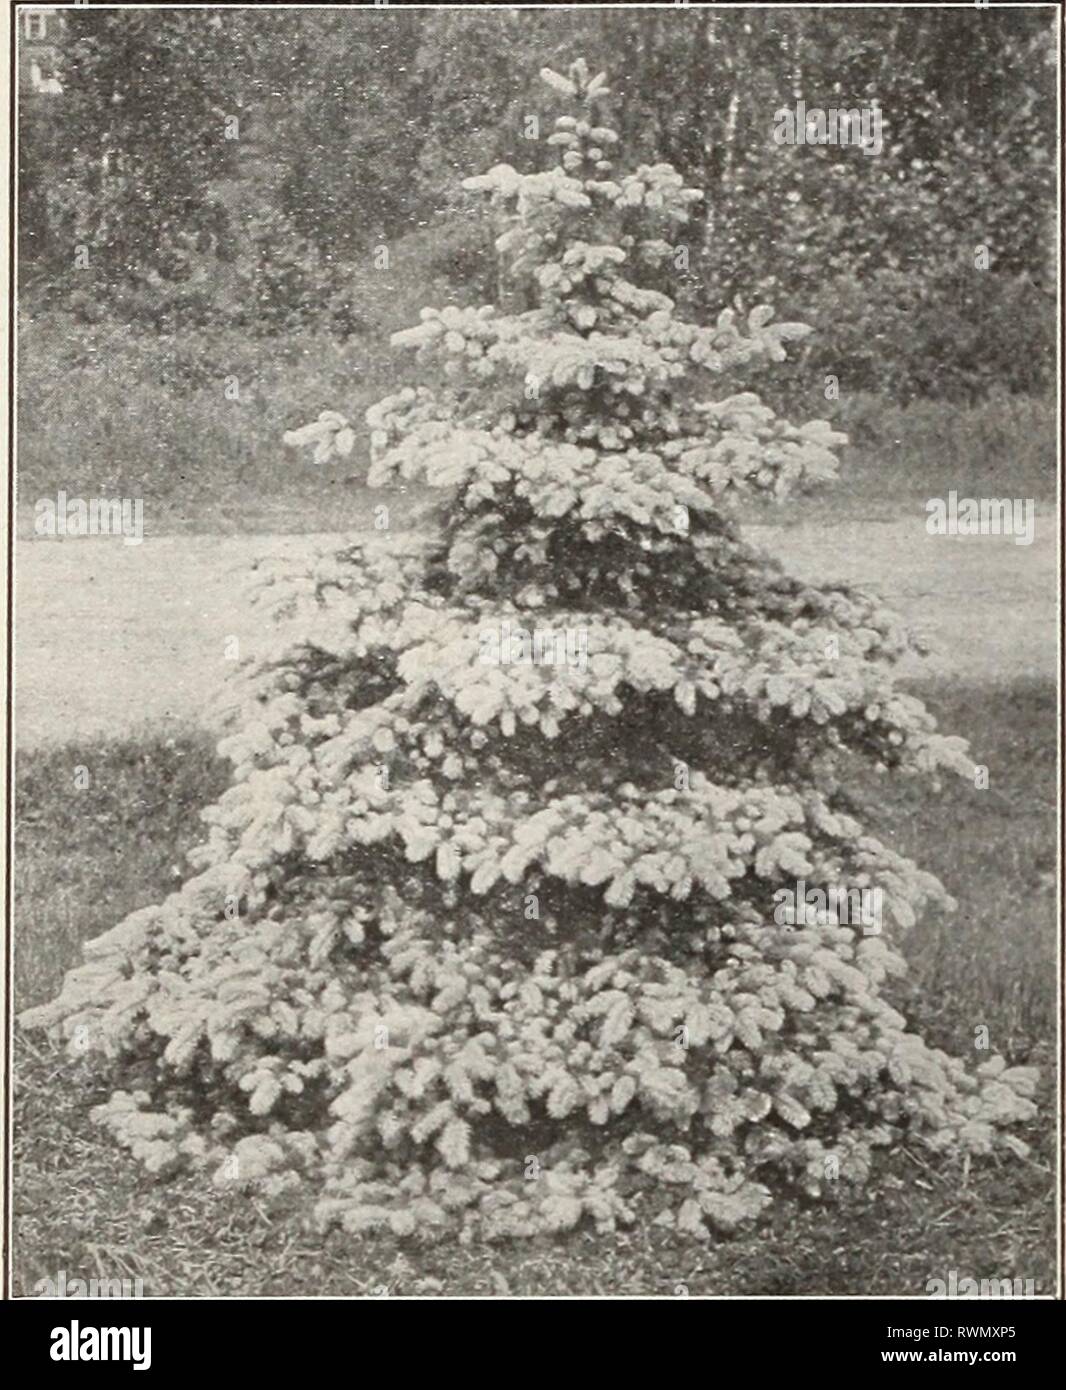 Ellwanger & Barry Mt Hope Ellwanger & Barry Mt Hope Nurseries 1916 ellwangerbarrymt1916moun Year: 1916  PICEAâSPRUCEâConr/nueJ P. Alcocquiana. Alcock's Spruce. B. From Japan. It forms a beautiful tree of close habit. Foliage pale green, silvery underneath. Valu- able. 2 ft., $2.00 each.    ROSTER'S BLUE SPRUCE P. Douglasii. Douglas' Spruce. C. From Col- orado. Large, conical form; branches spread- ing, horizontal; leaves light green above, glau- cous below. A valuable evergreen tree. 2 to 3 ft., $1.50 each. 3 to 4 ft., $2.00 each. P. excelsa. Norway Spruce. A. From Europe. An elegant tree; ext Stock Photo